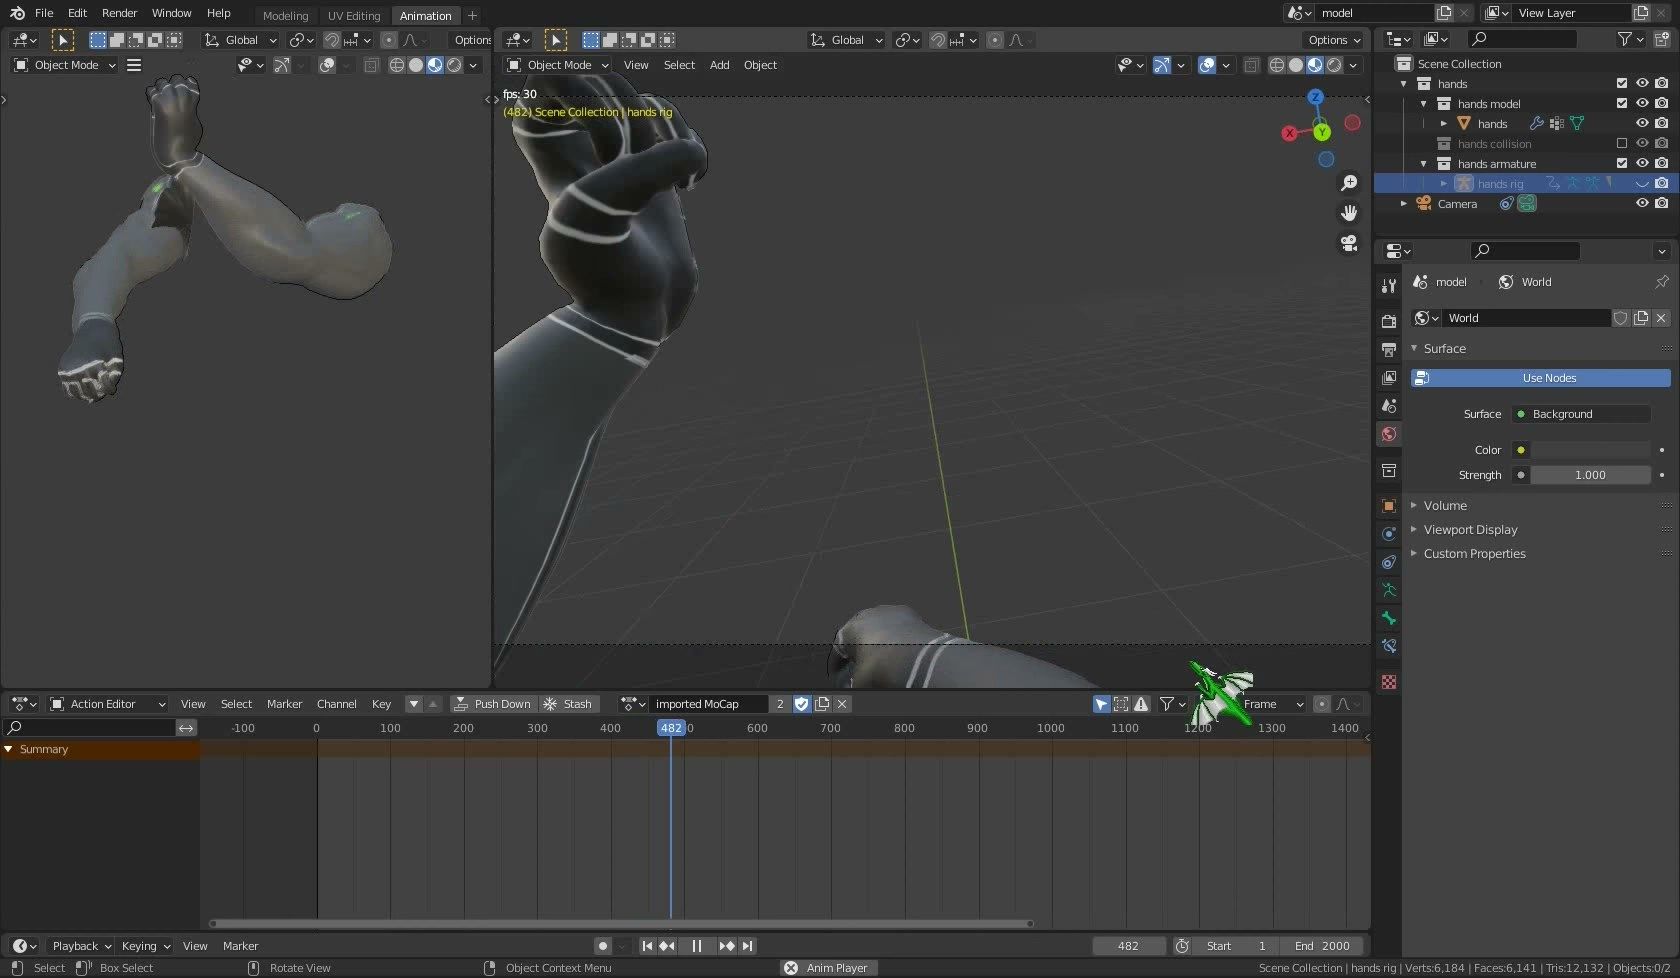 Supports First Person View motion capture